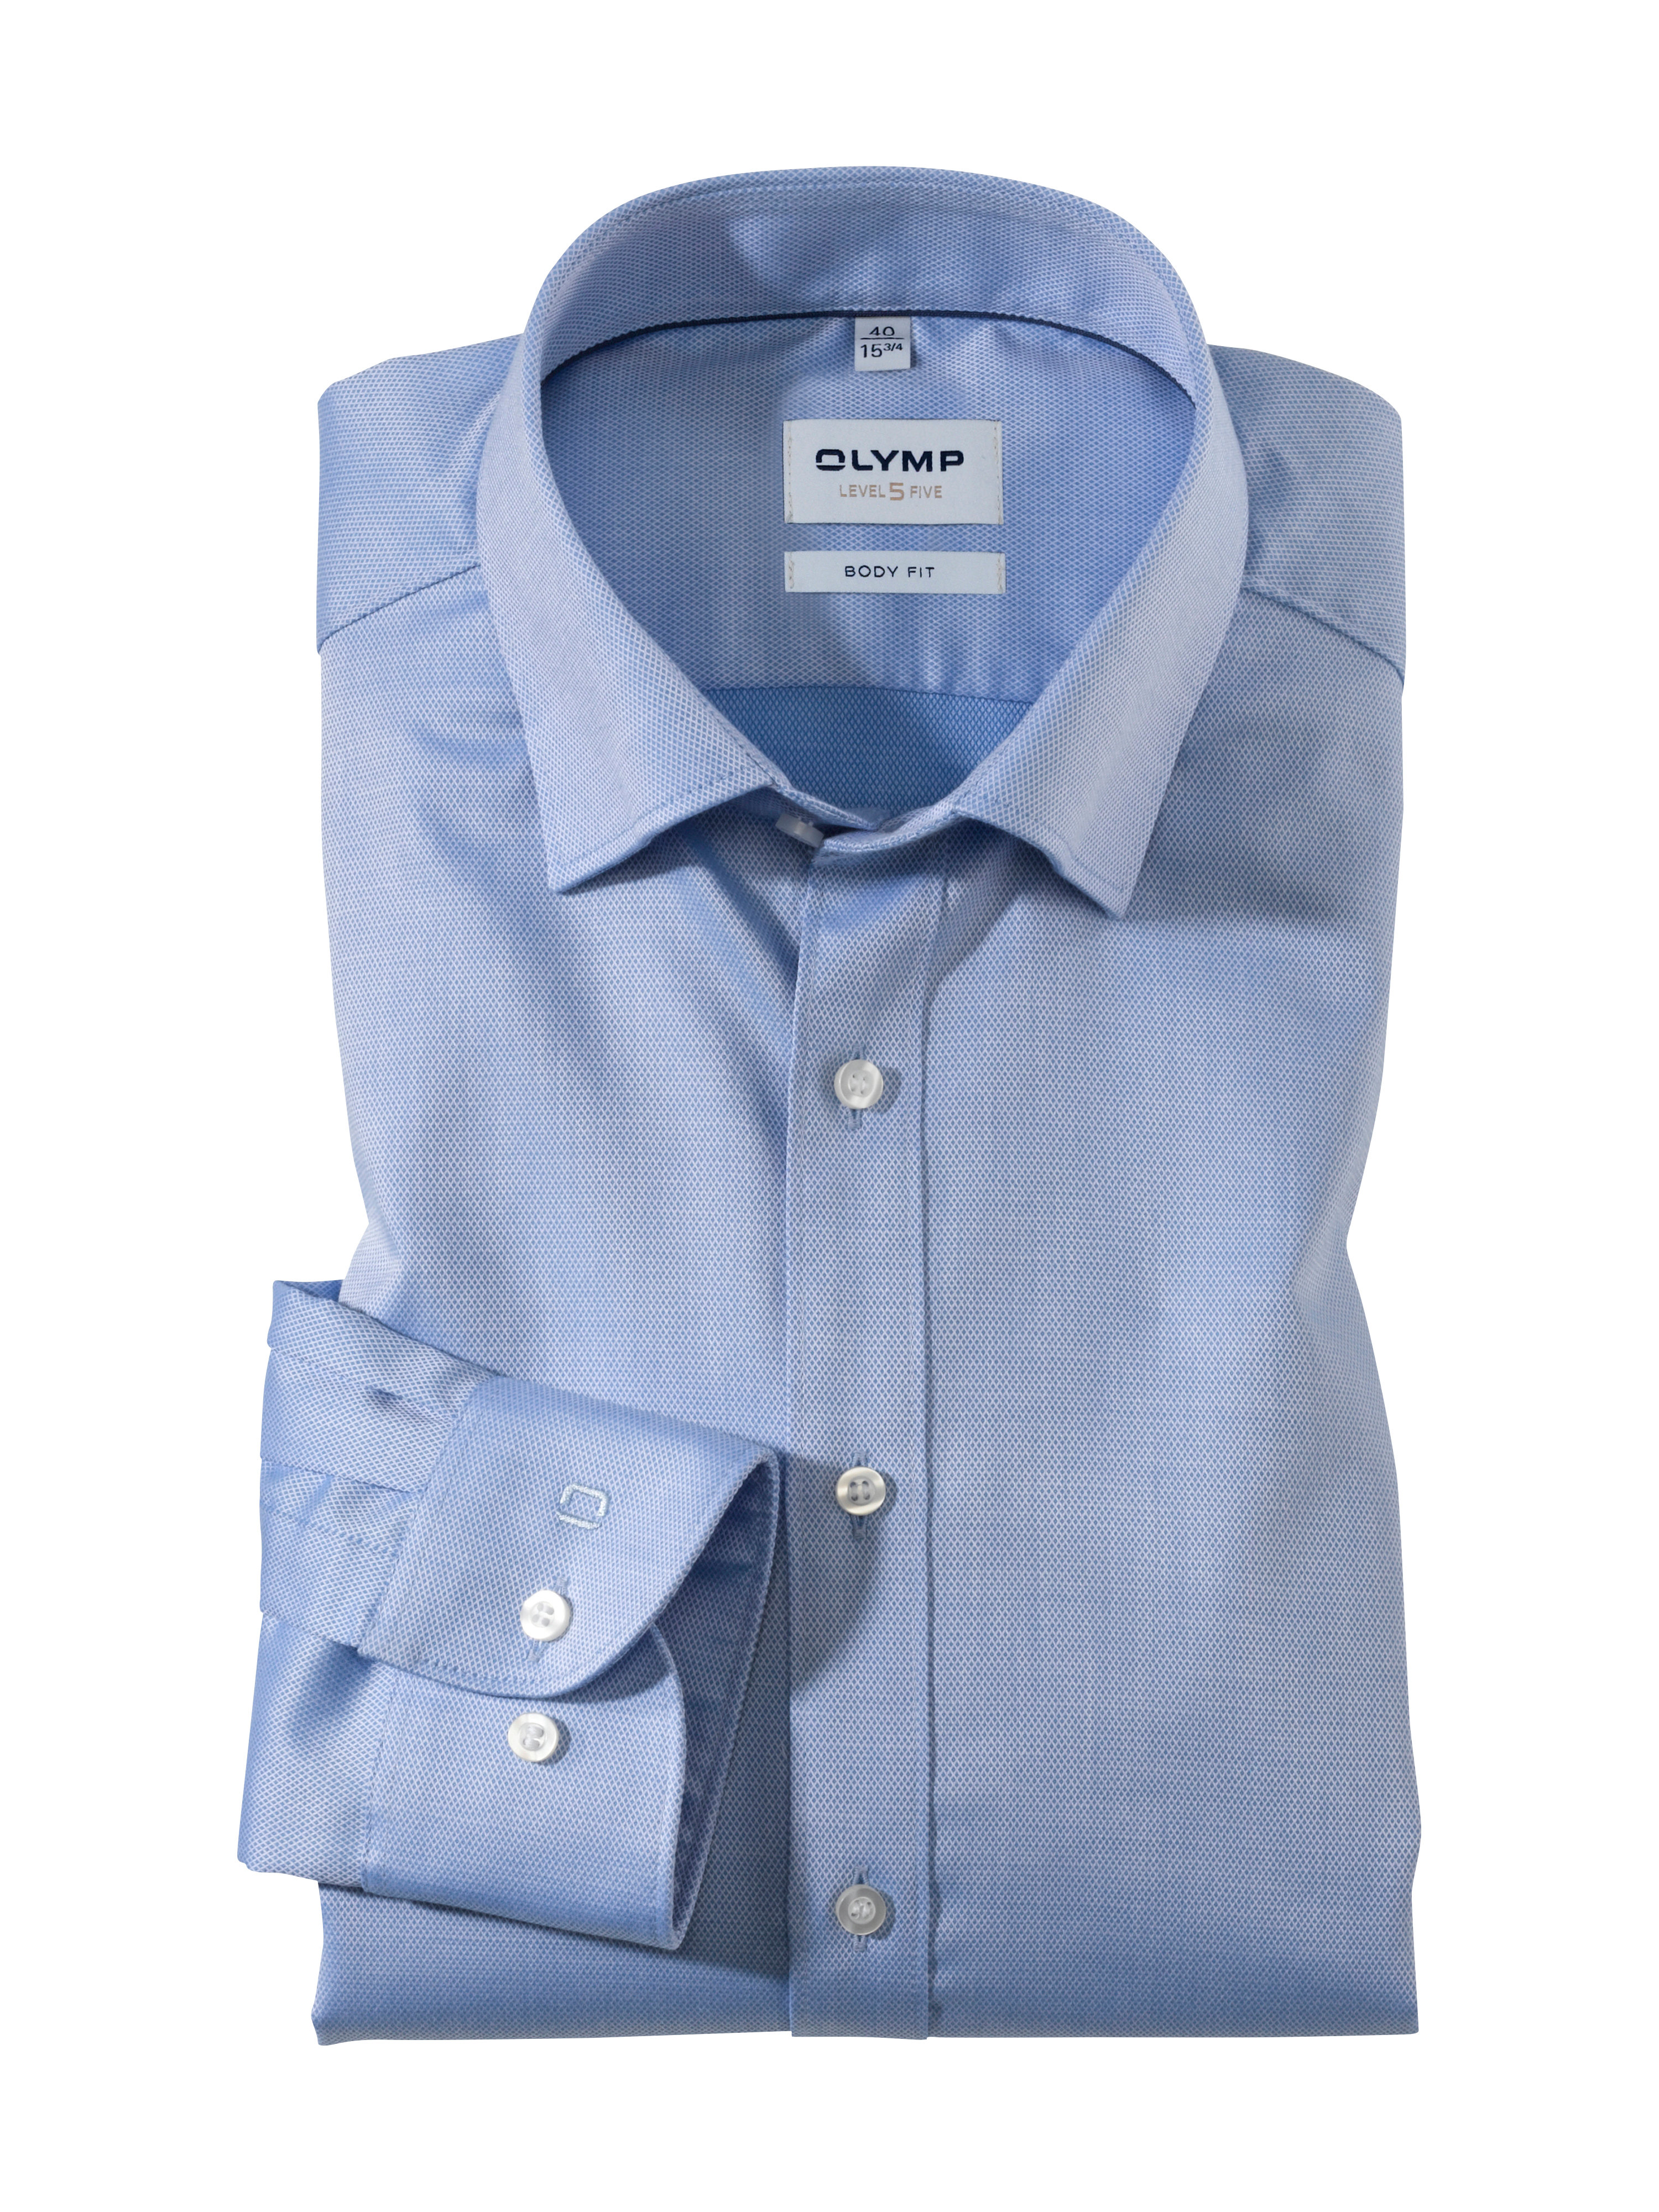 Business shirt | OLYMP button-down Blue body Level - Five, | 04646415 Under fit